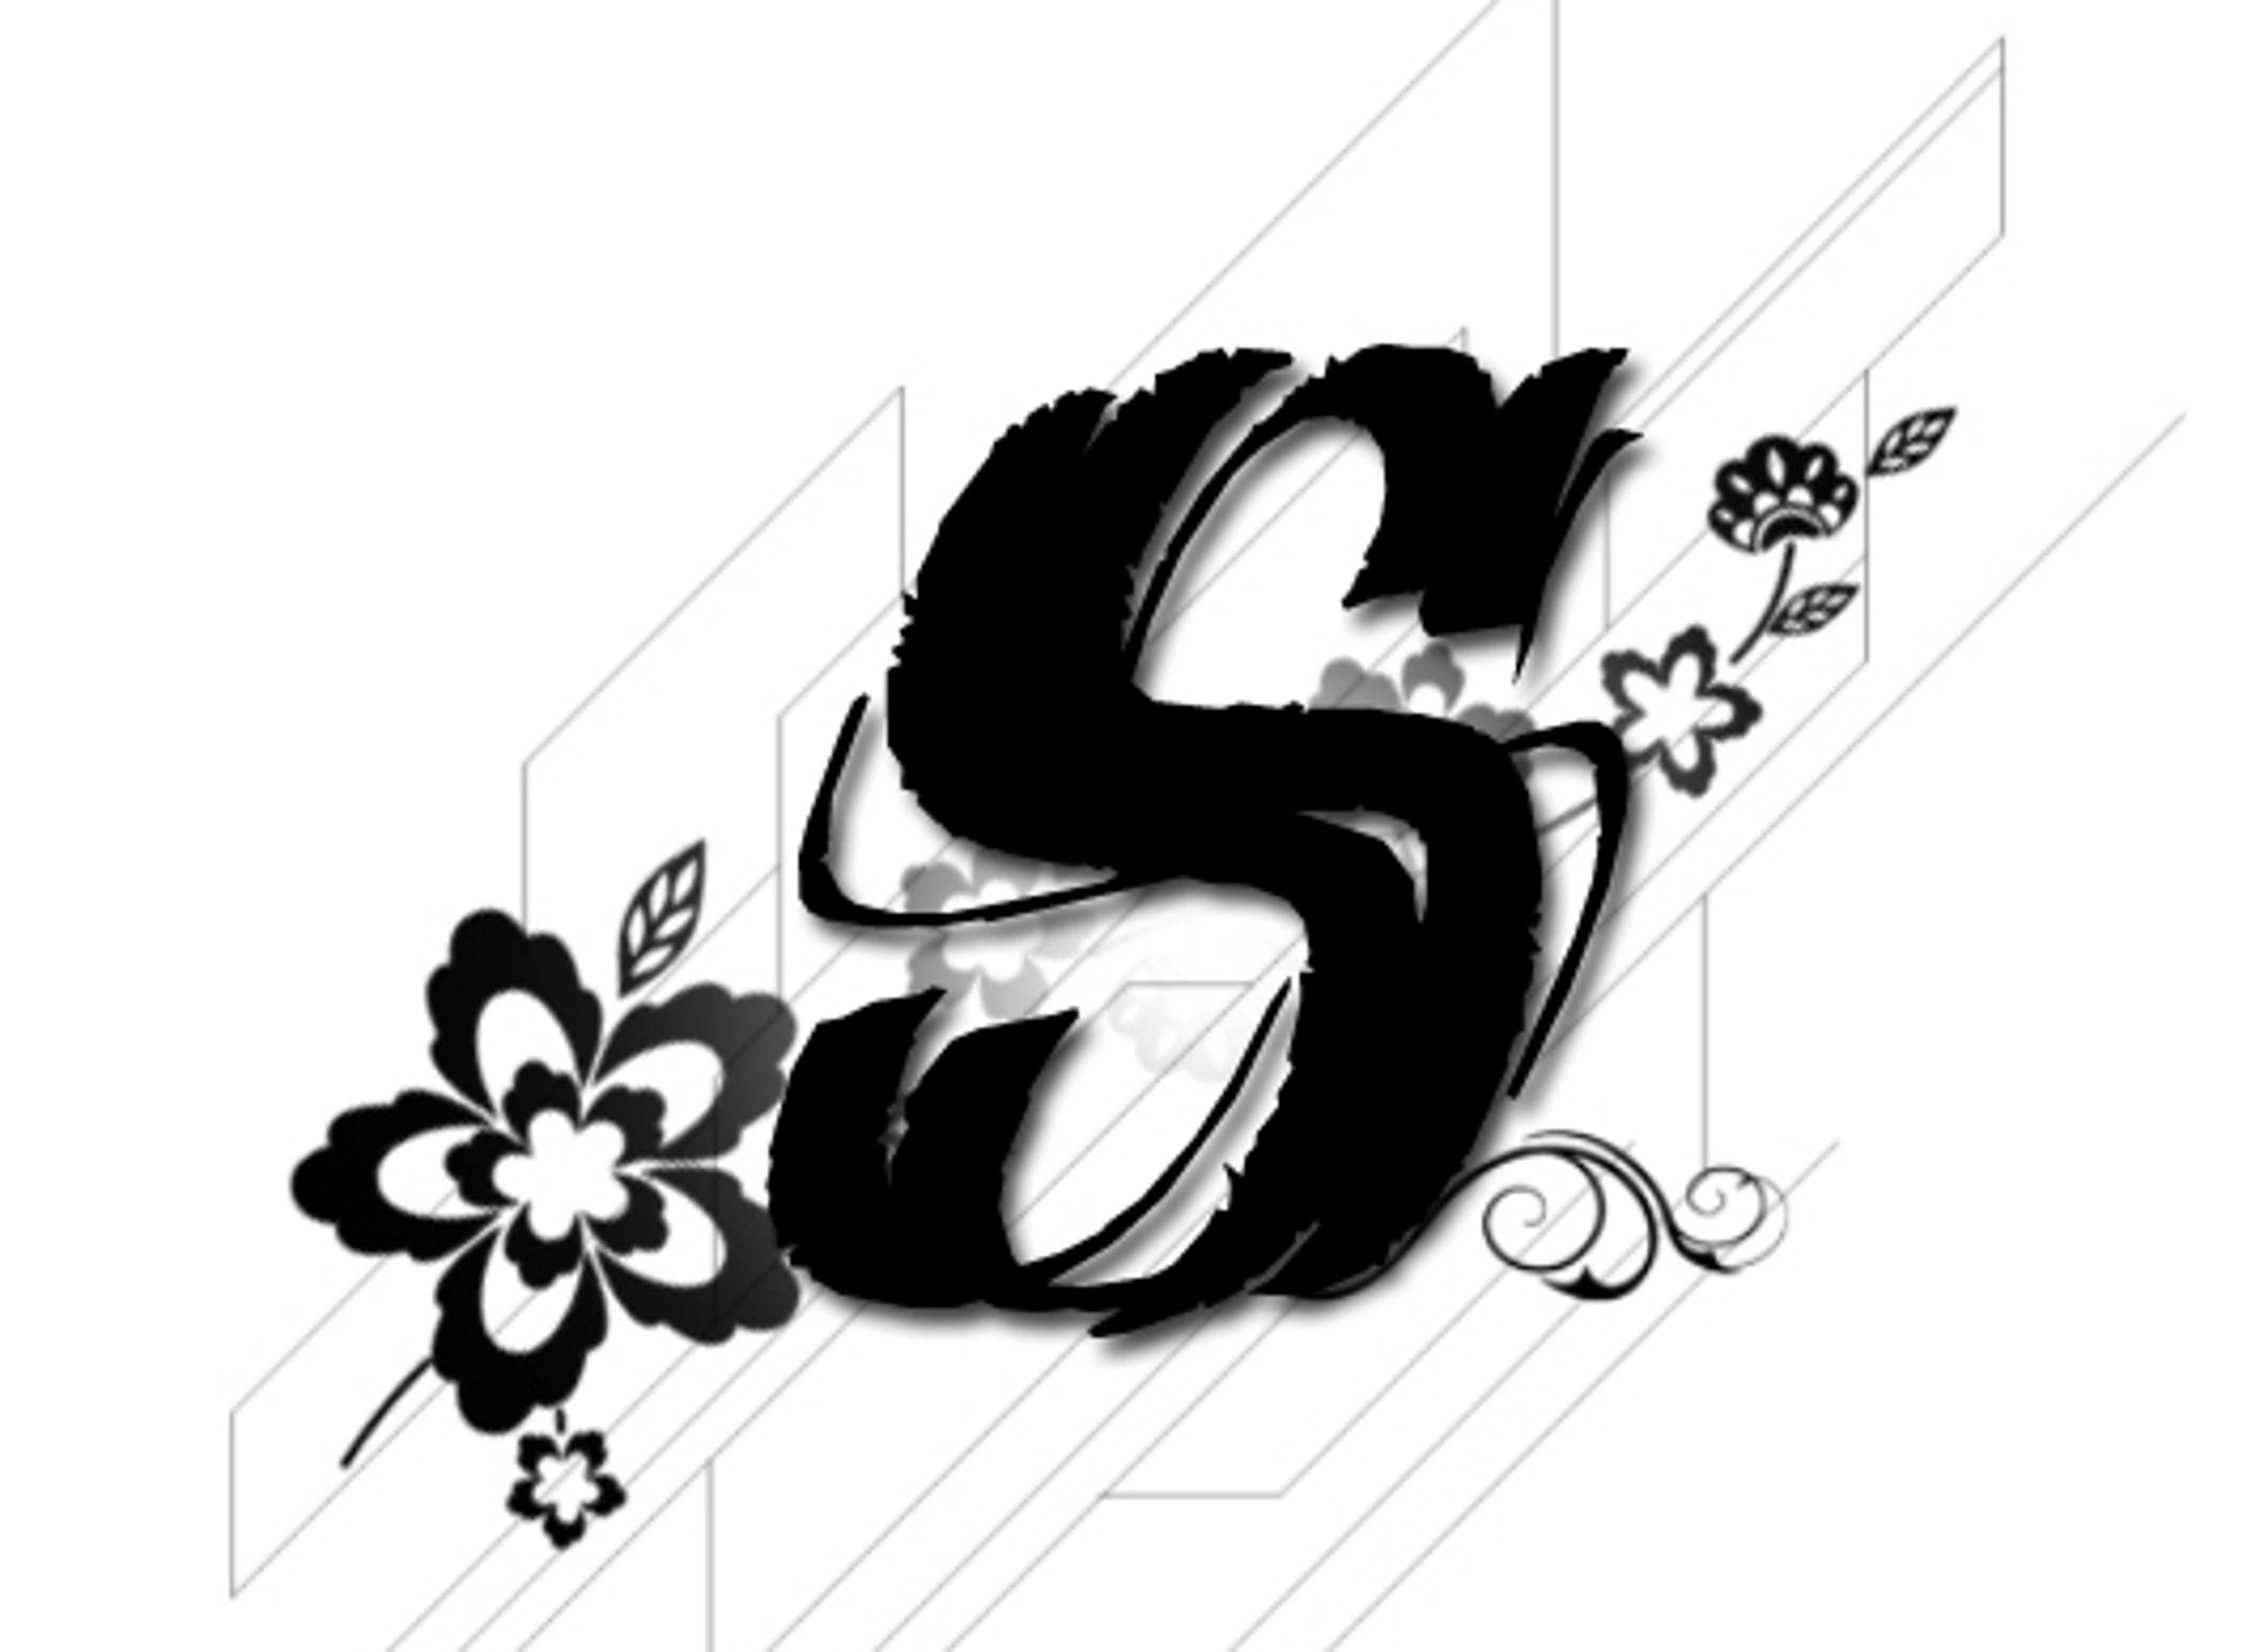 Letter S Wallpapers - Wallpaper Cave